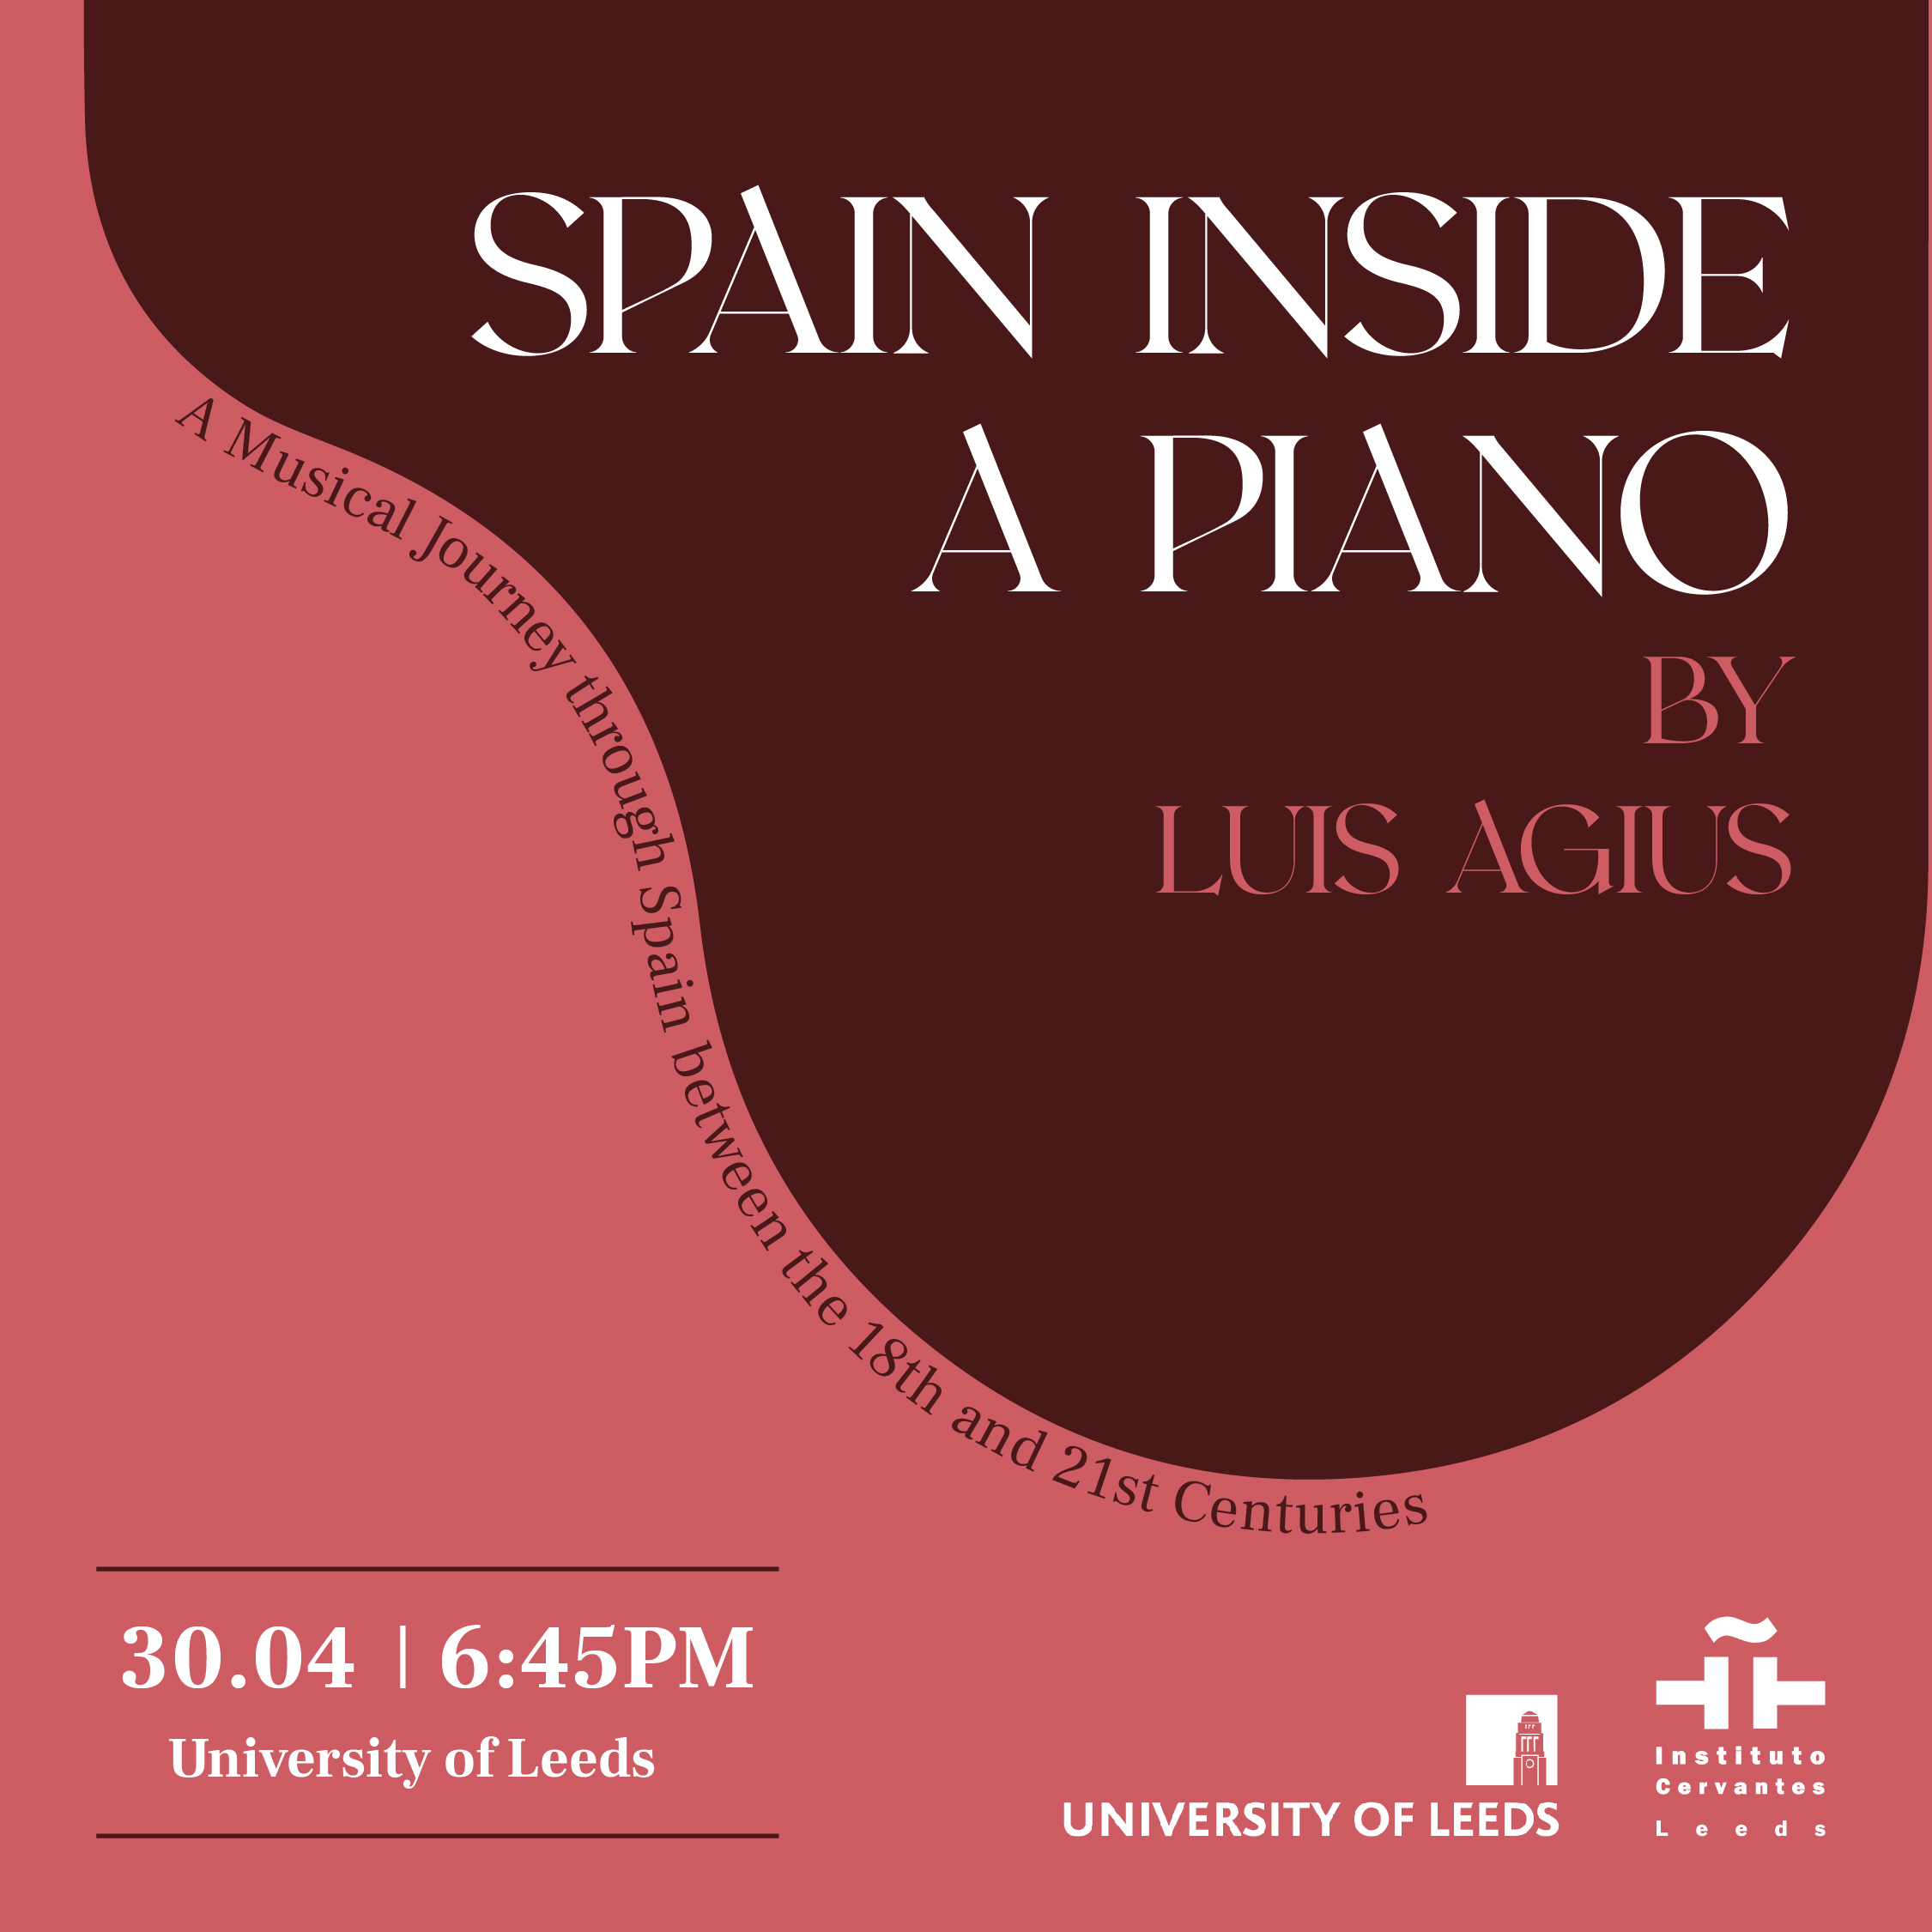 Spain Inside a Piano. A Musical Journey throughout Spain from 18th to 21st Century